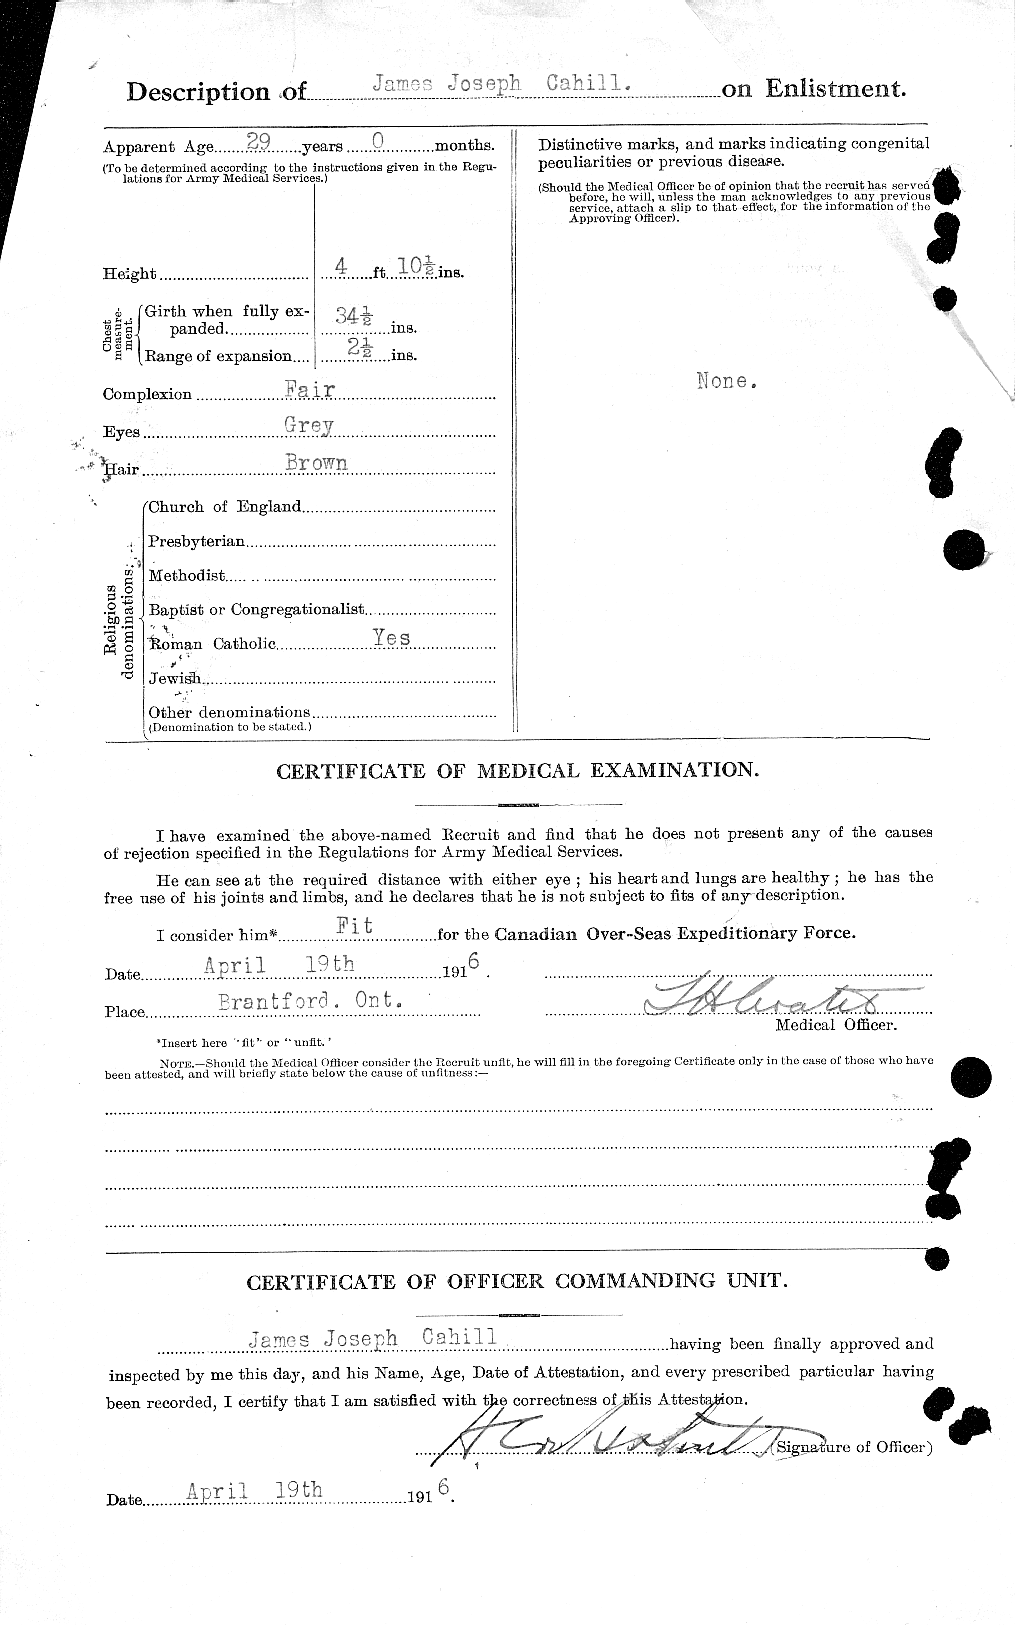 Personnel Records of the First World War - CEF 000250b